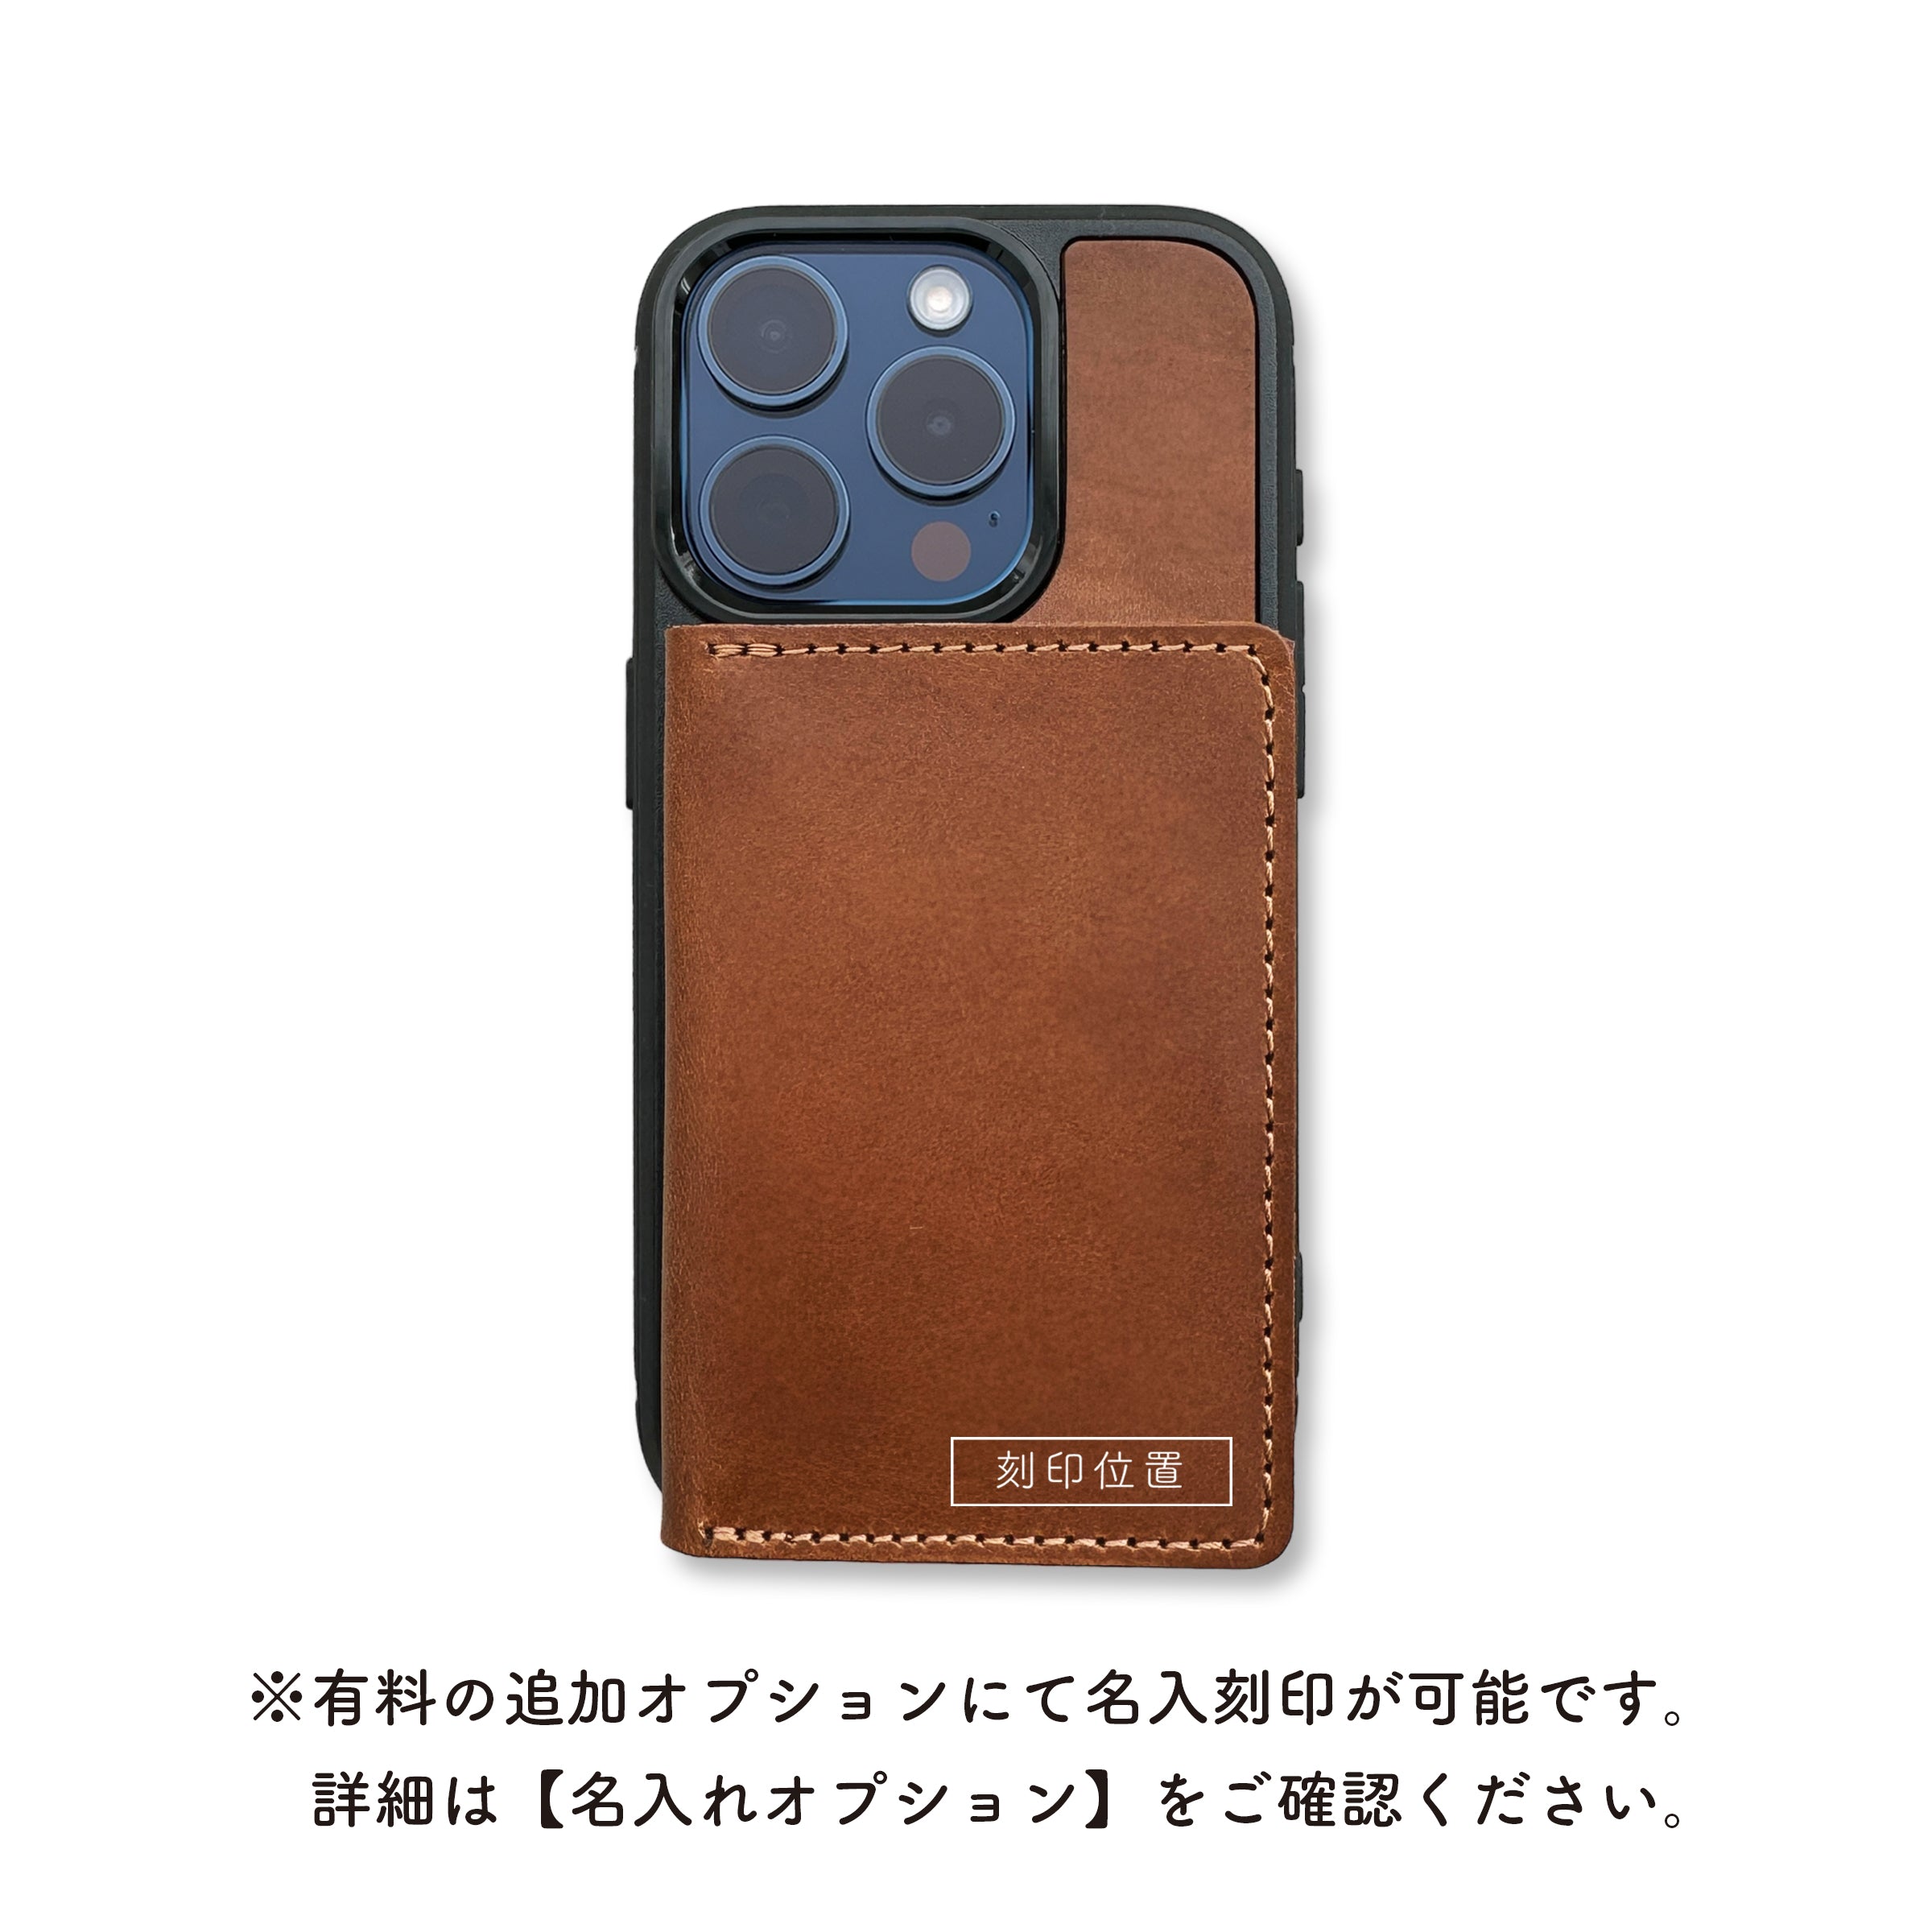 Motto Buttero iPhone case and wallet